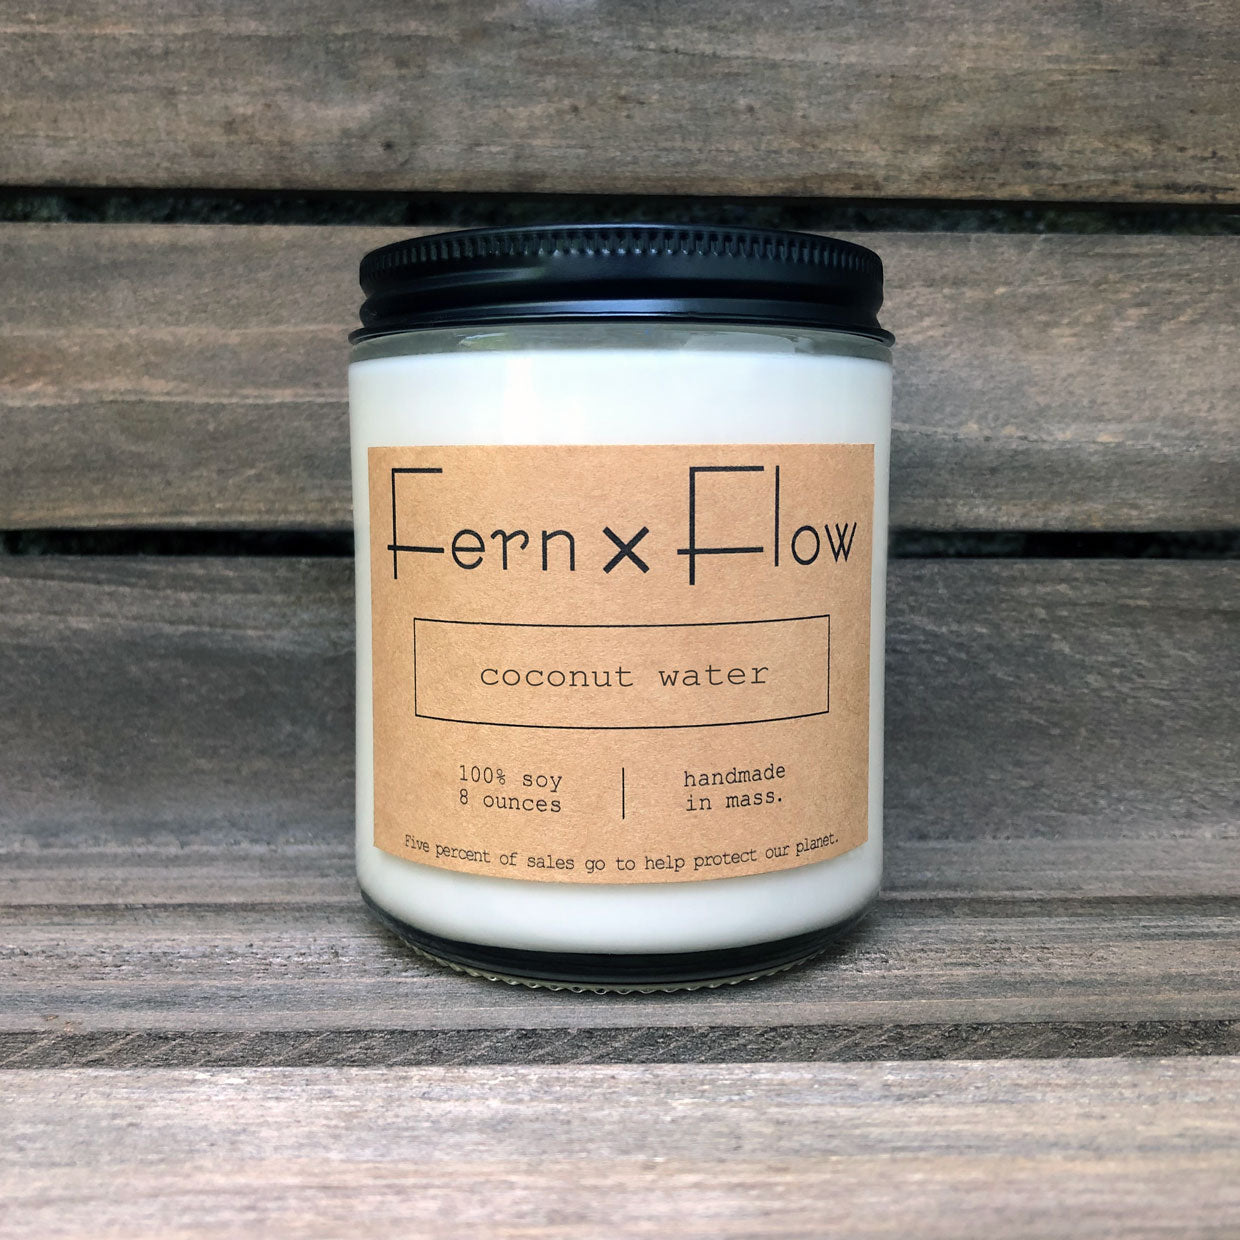 Eight-ounce Fern x Flow Coconut Water scented soy candle against a weathered, wooden crate.